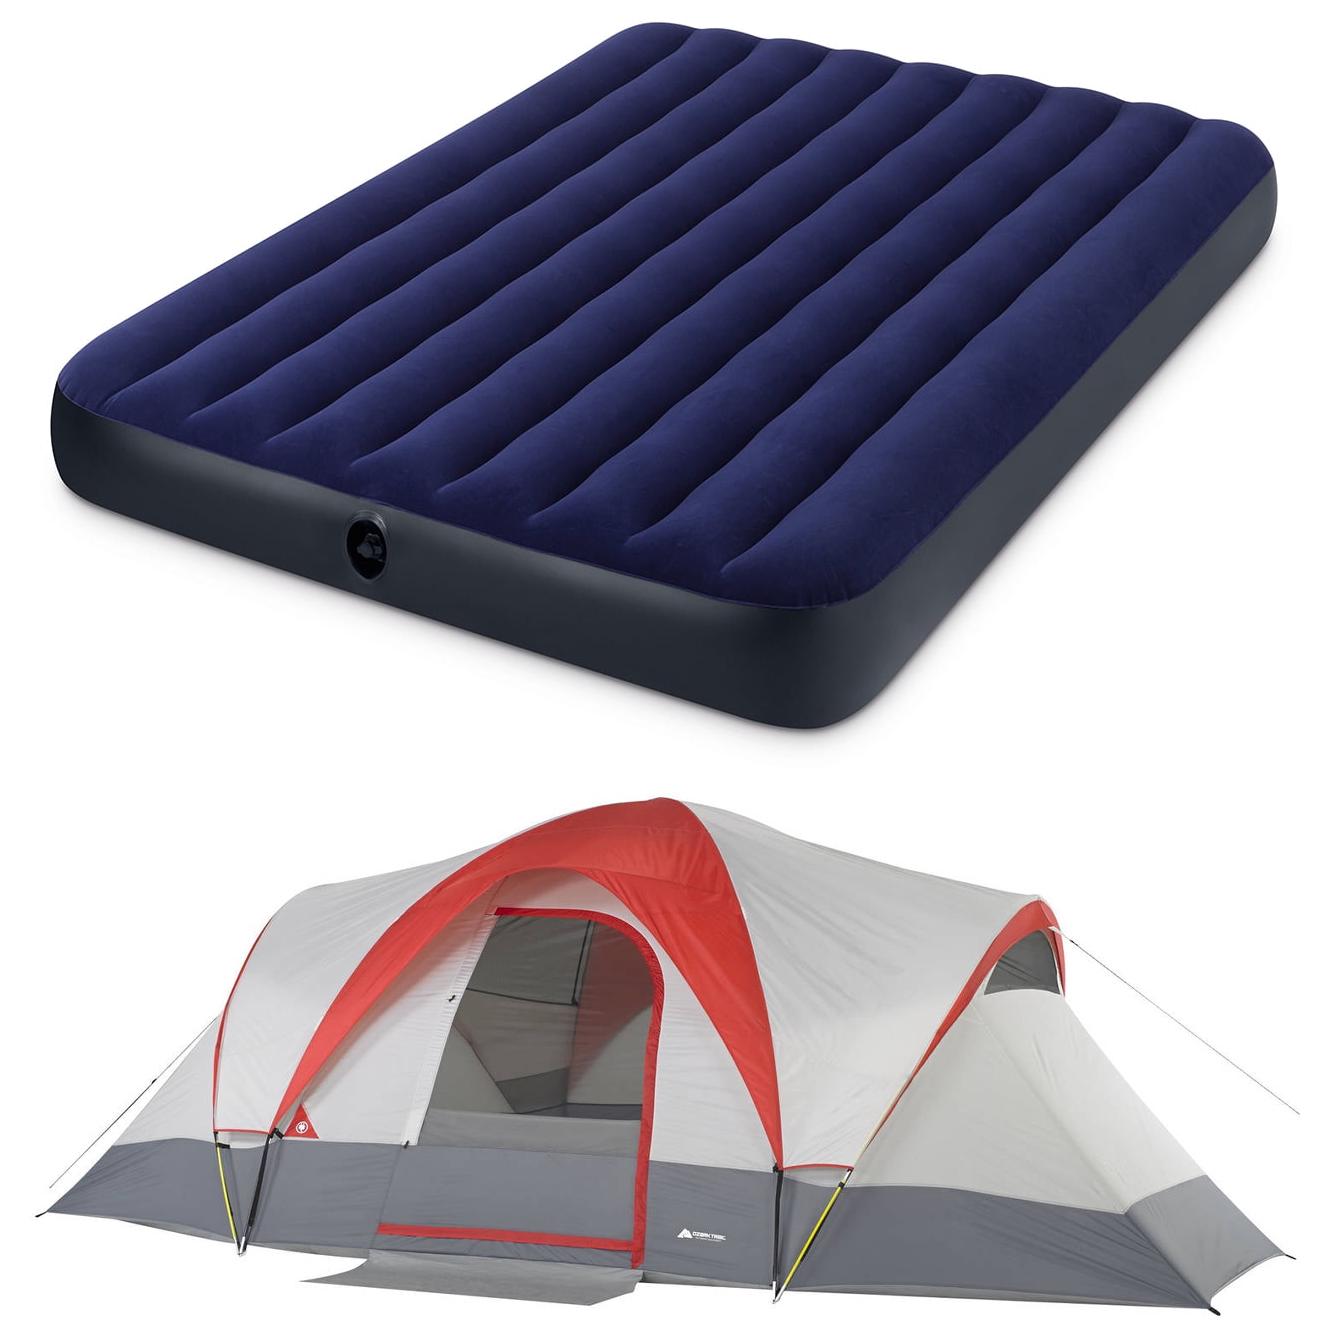 Ozark Trail Weatherbuster 9 Person Dome Tent with Two Queen Airbeds - 18' x 10' - 22.48lbs. - image 1 of 3